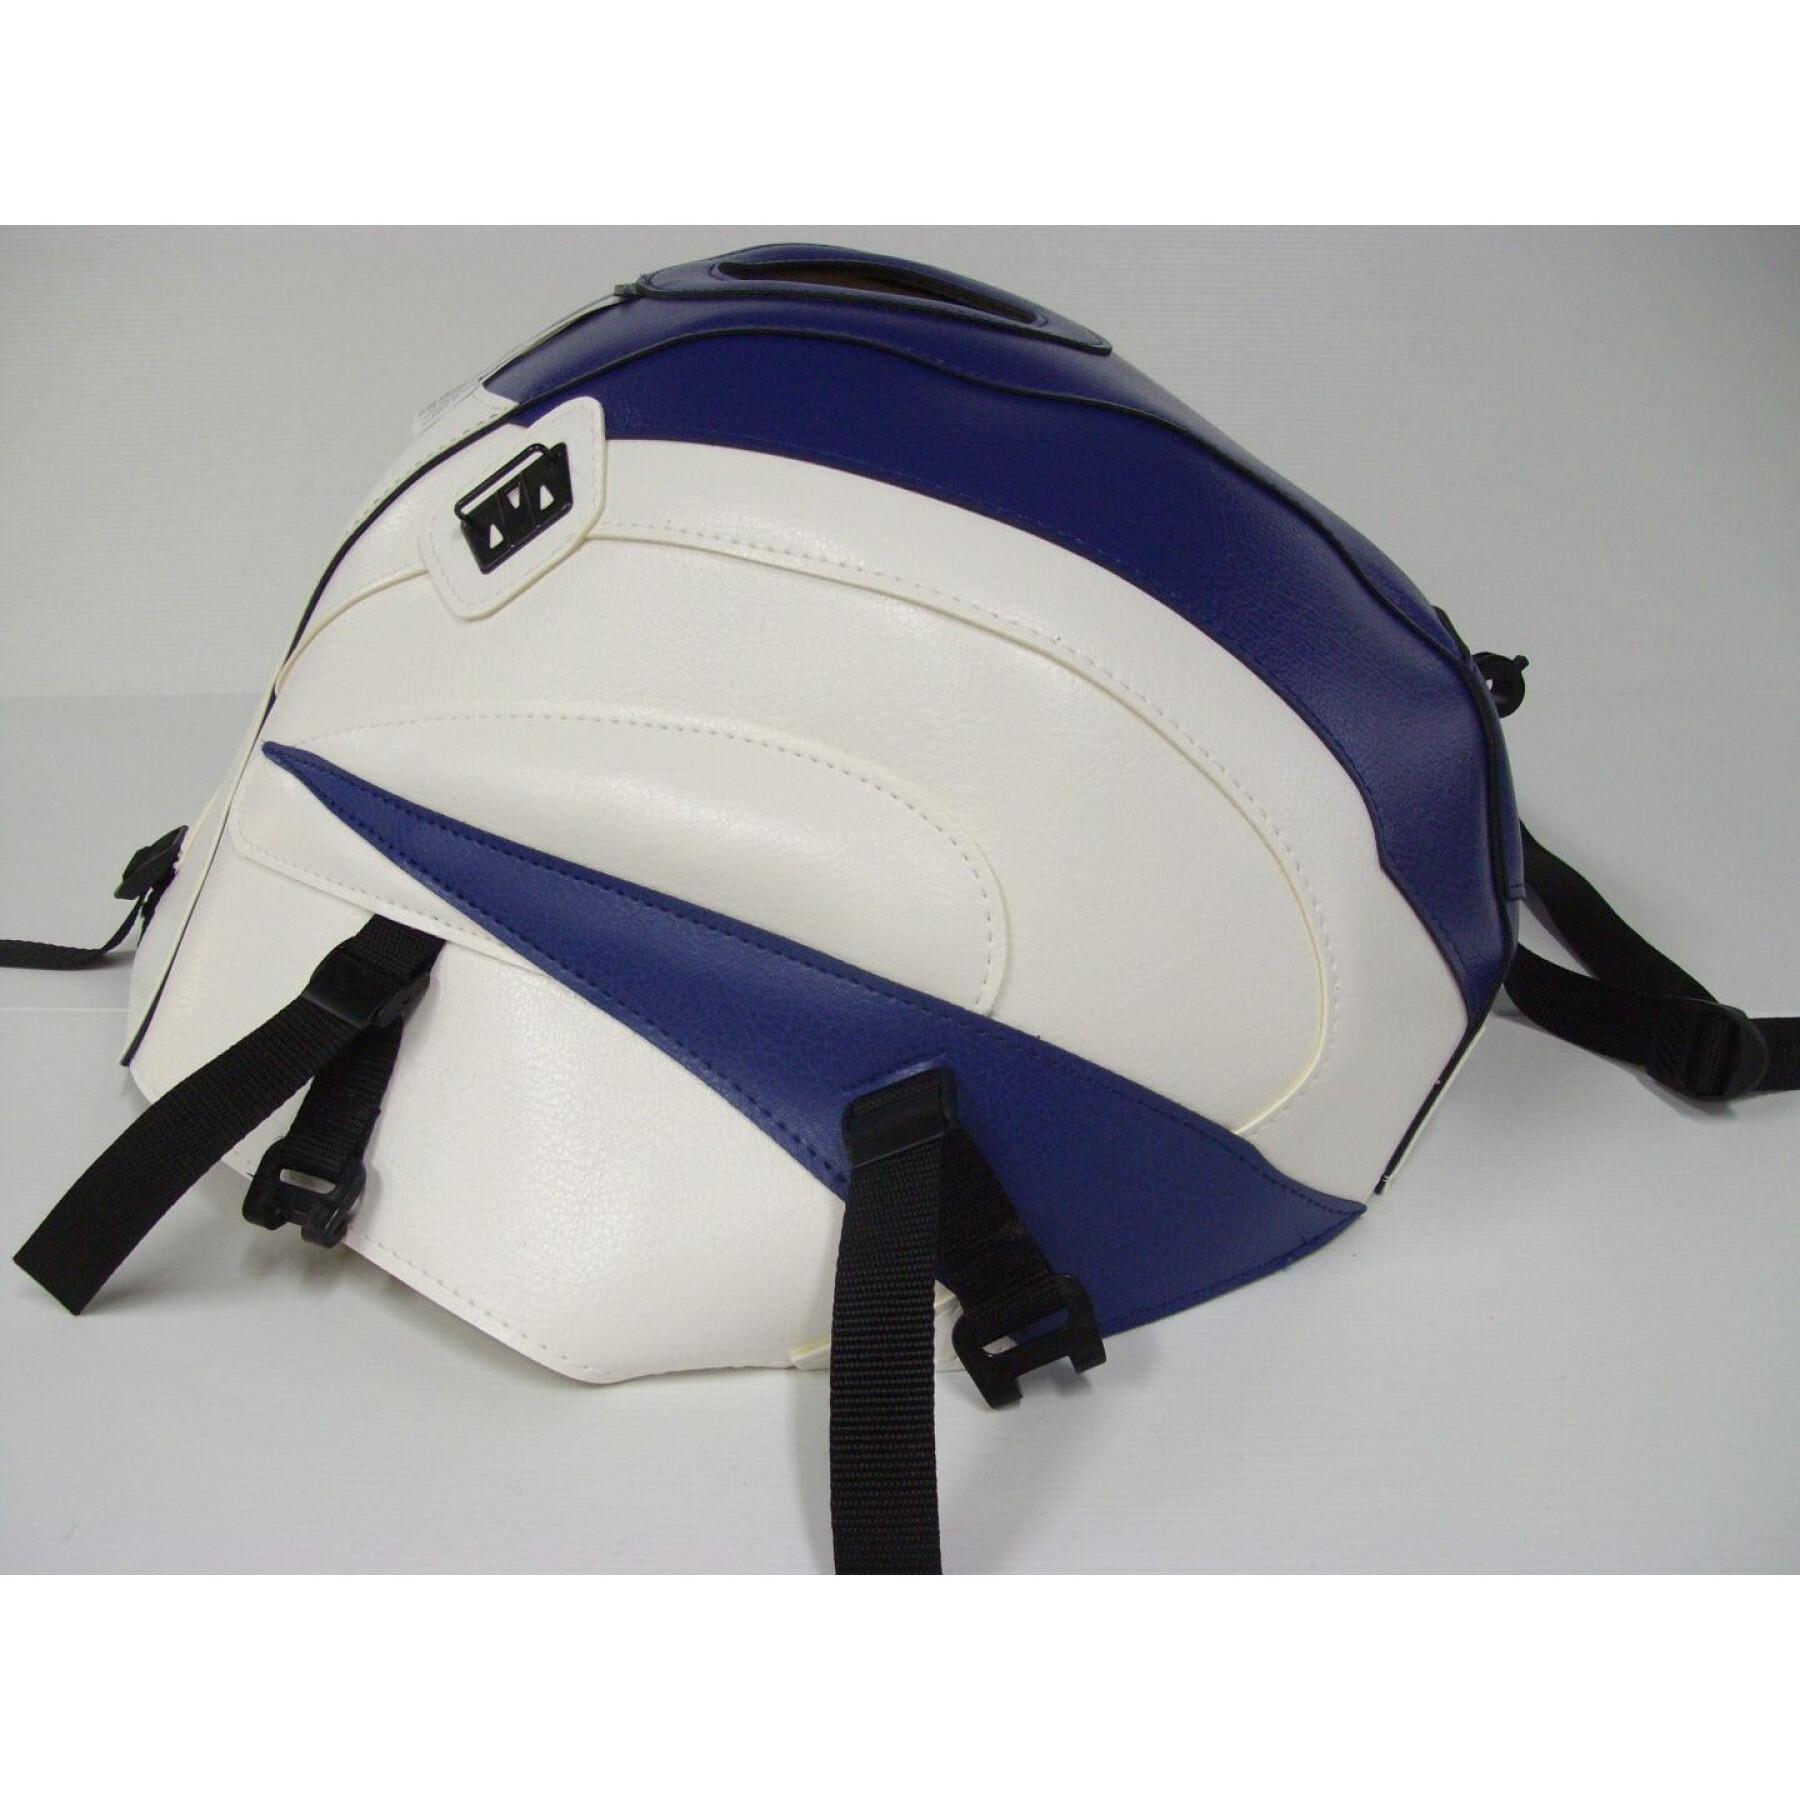 Motorcycle tank cover Bagster tl 1000 r